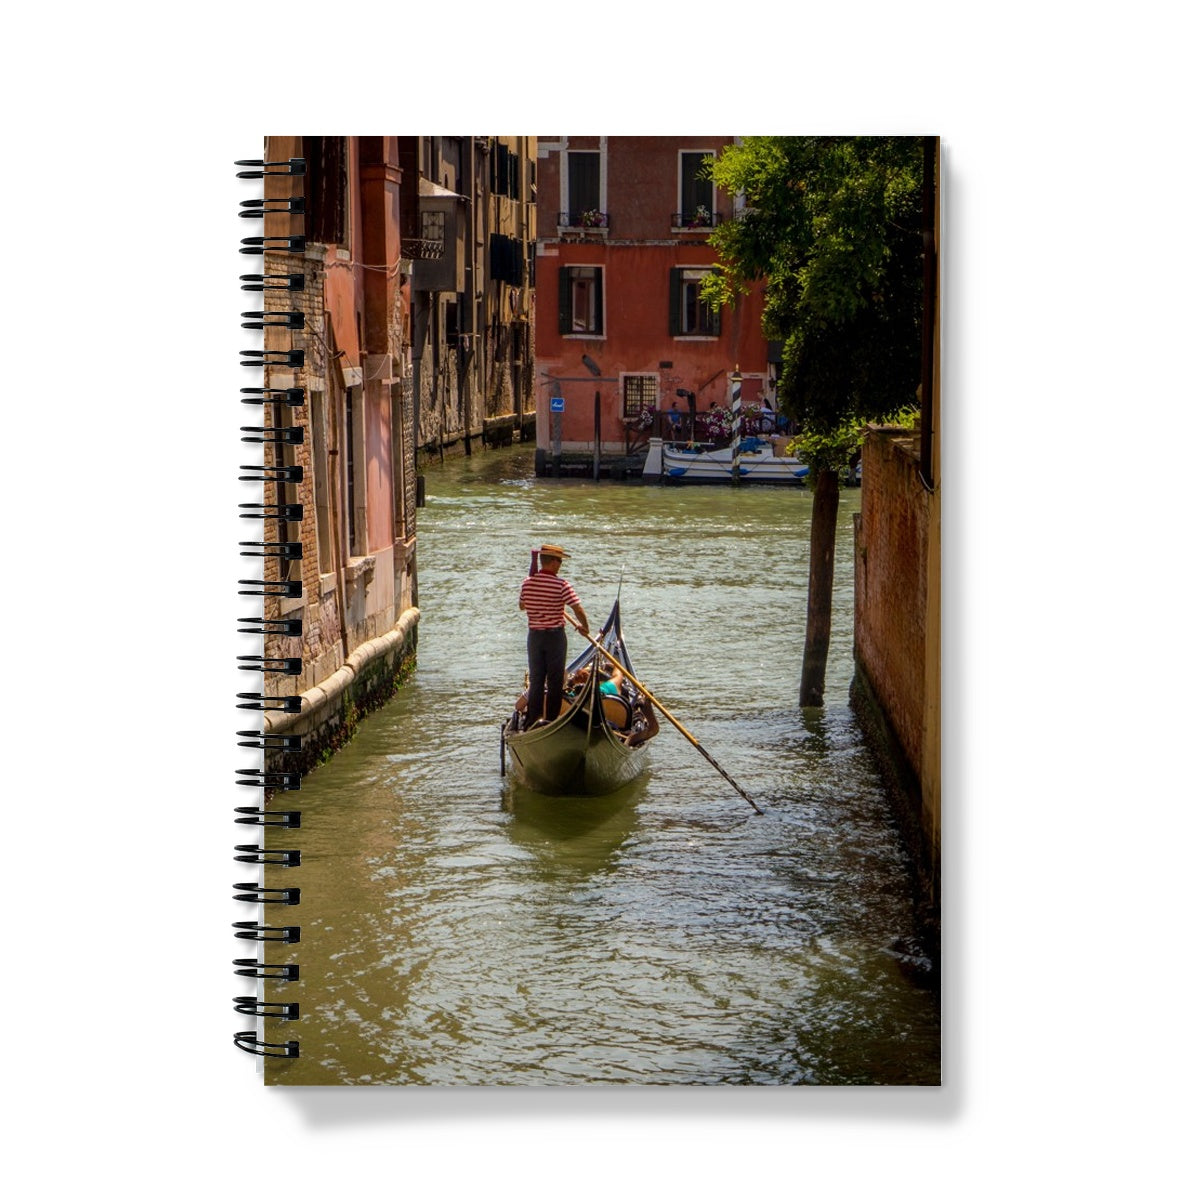 Gondola with gondolier wearing a traditional boater hat and striped top on a  canal in Venice. Italy. Notebook